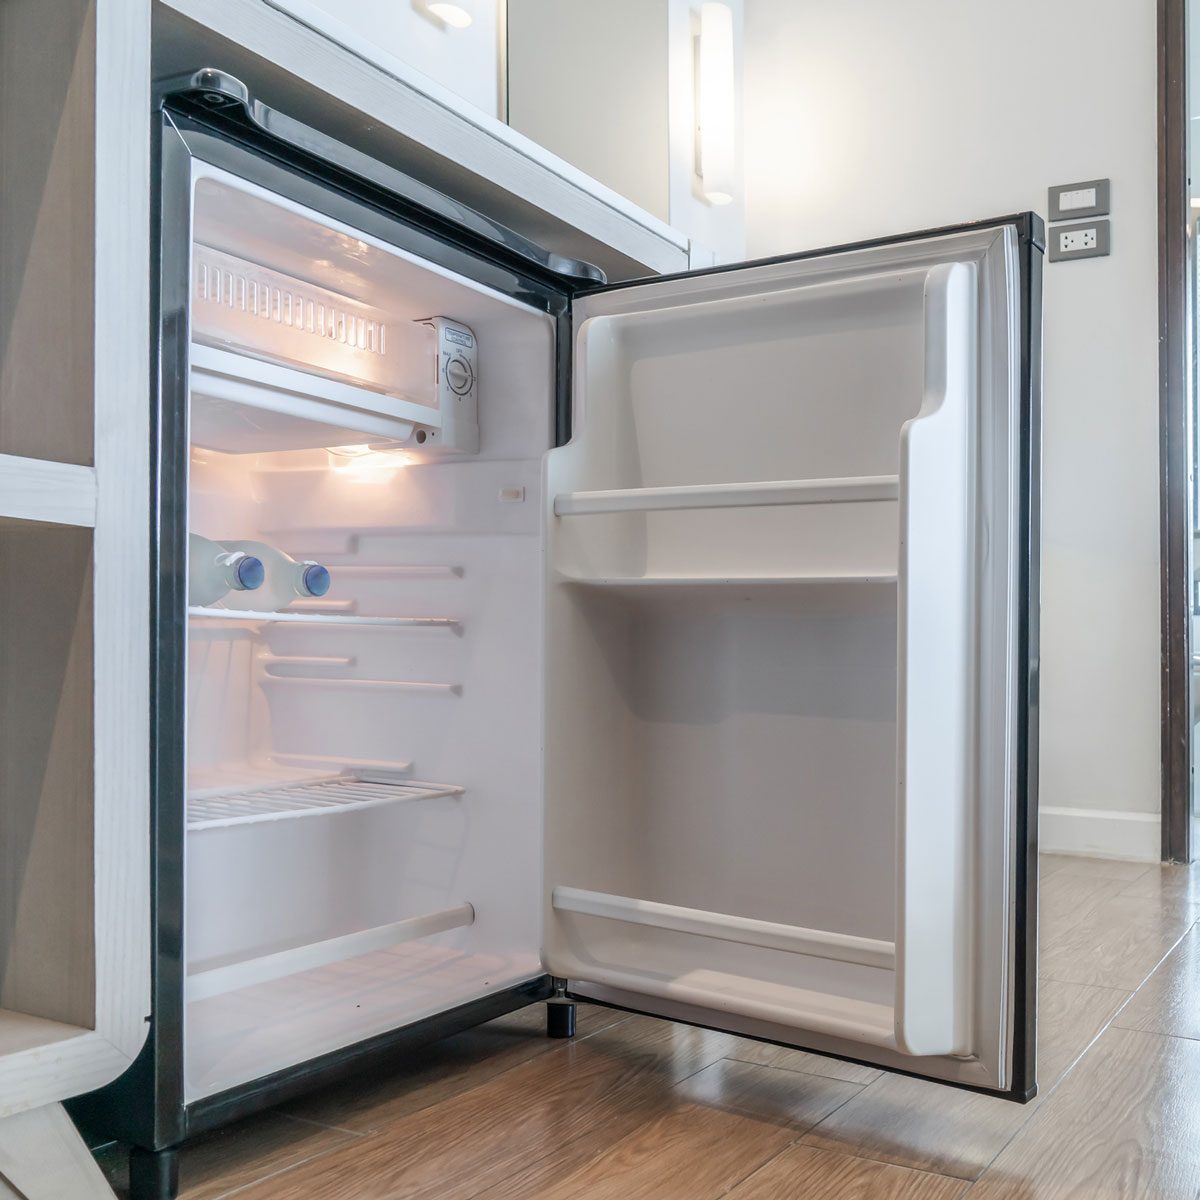 Best Mini Fridges For Small Offices: The Expert Recommendations